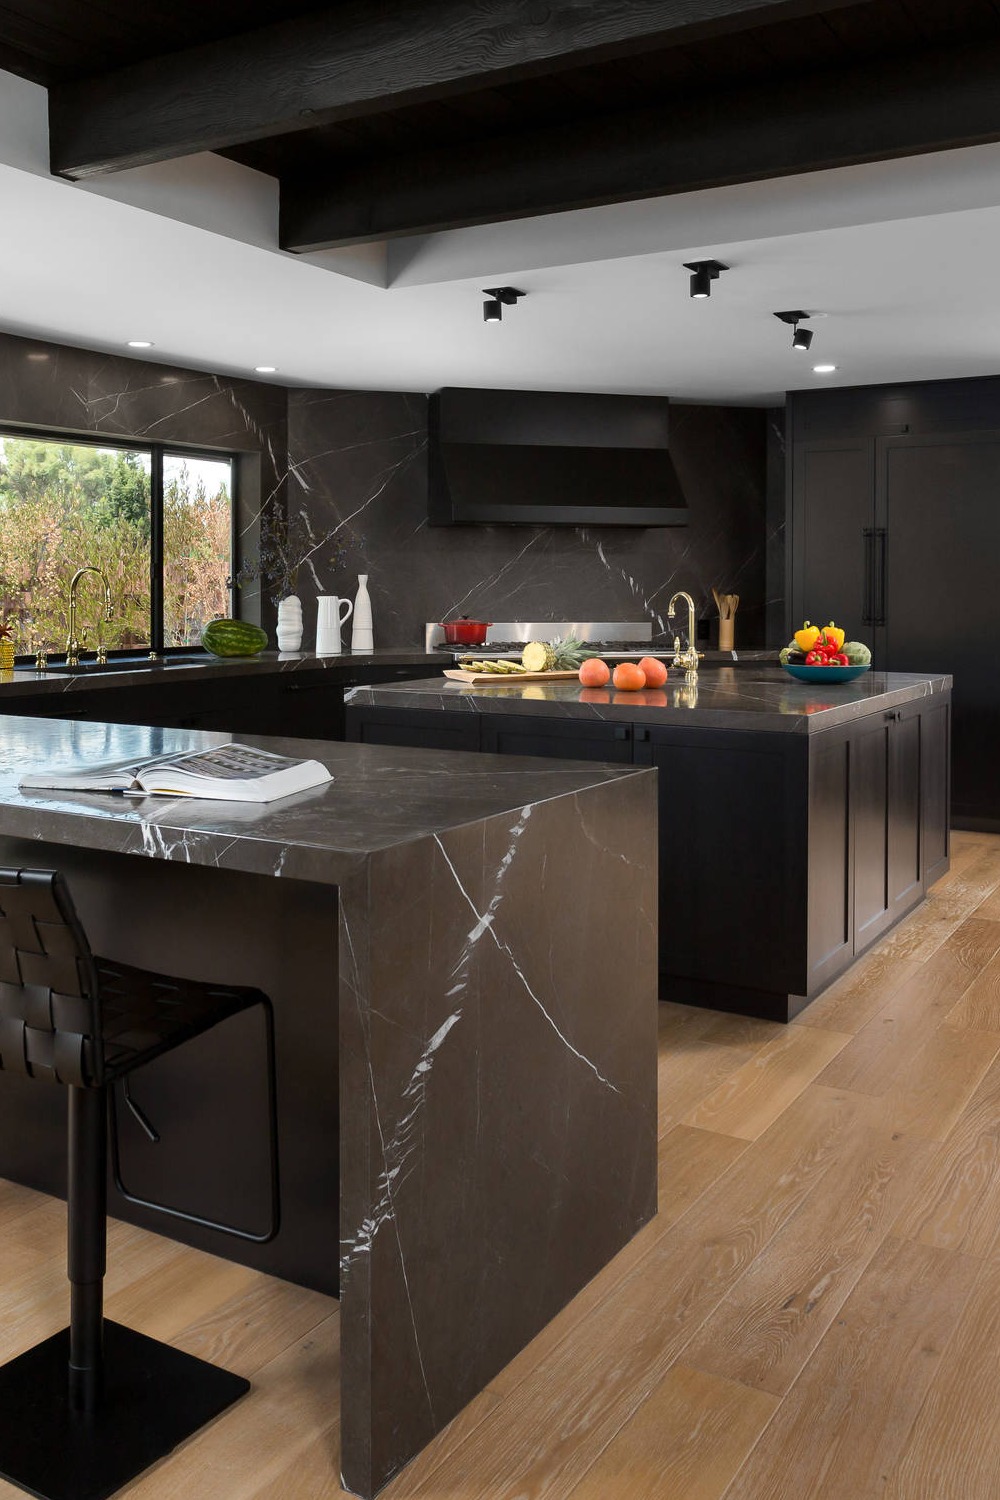 Full Height Backsplash Black Countertops Kitchen With Black Cabinets Cooking Space Waterfall Island Edge